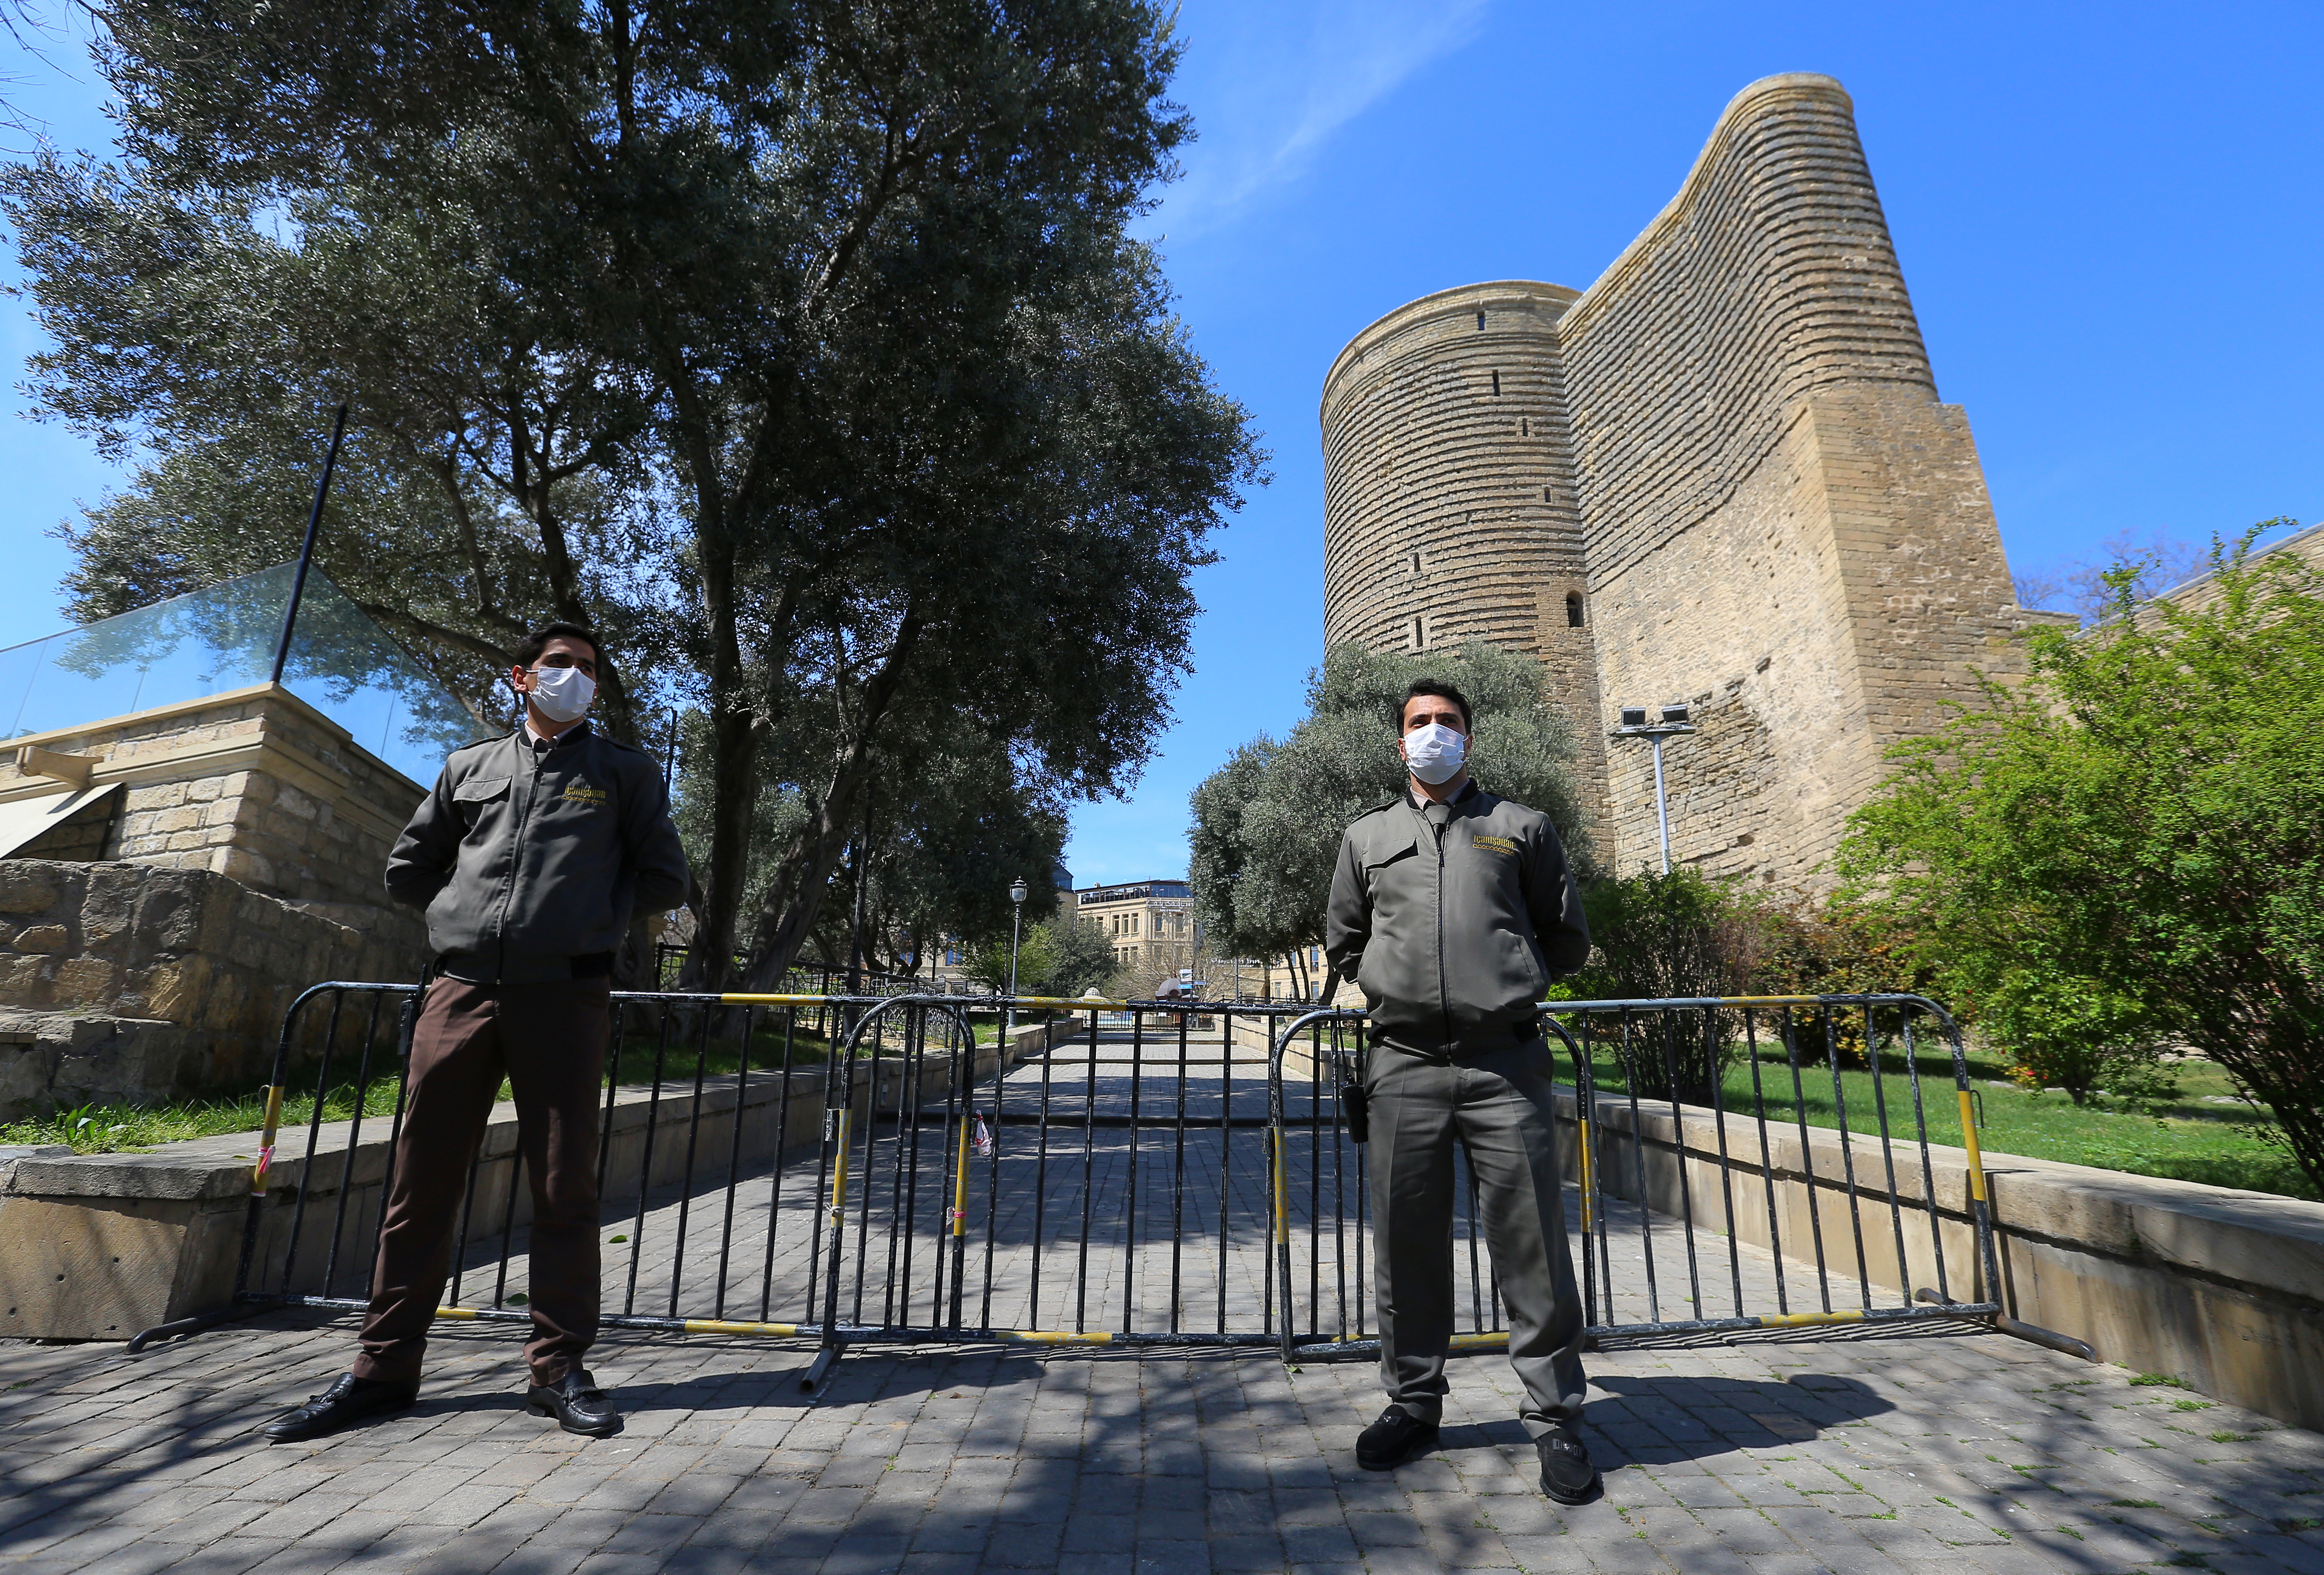 Azeri law enforcement officers stand guard in a street as authorities tightened up measures to prevent the spread of coronavirus disease (COVID-19) in Baku, Azerbaijan April 1, 2020. REUTERS/Aziz Karimov